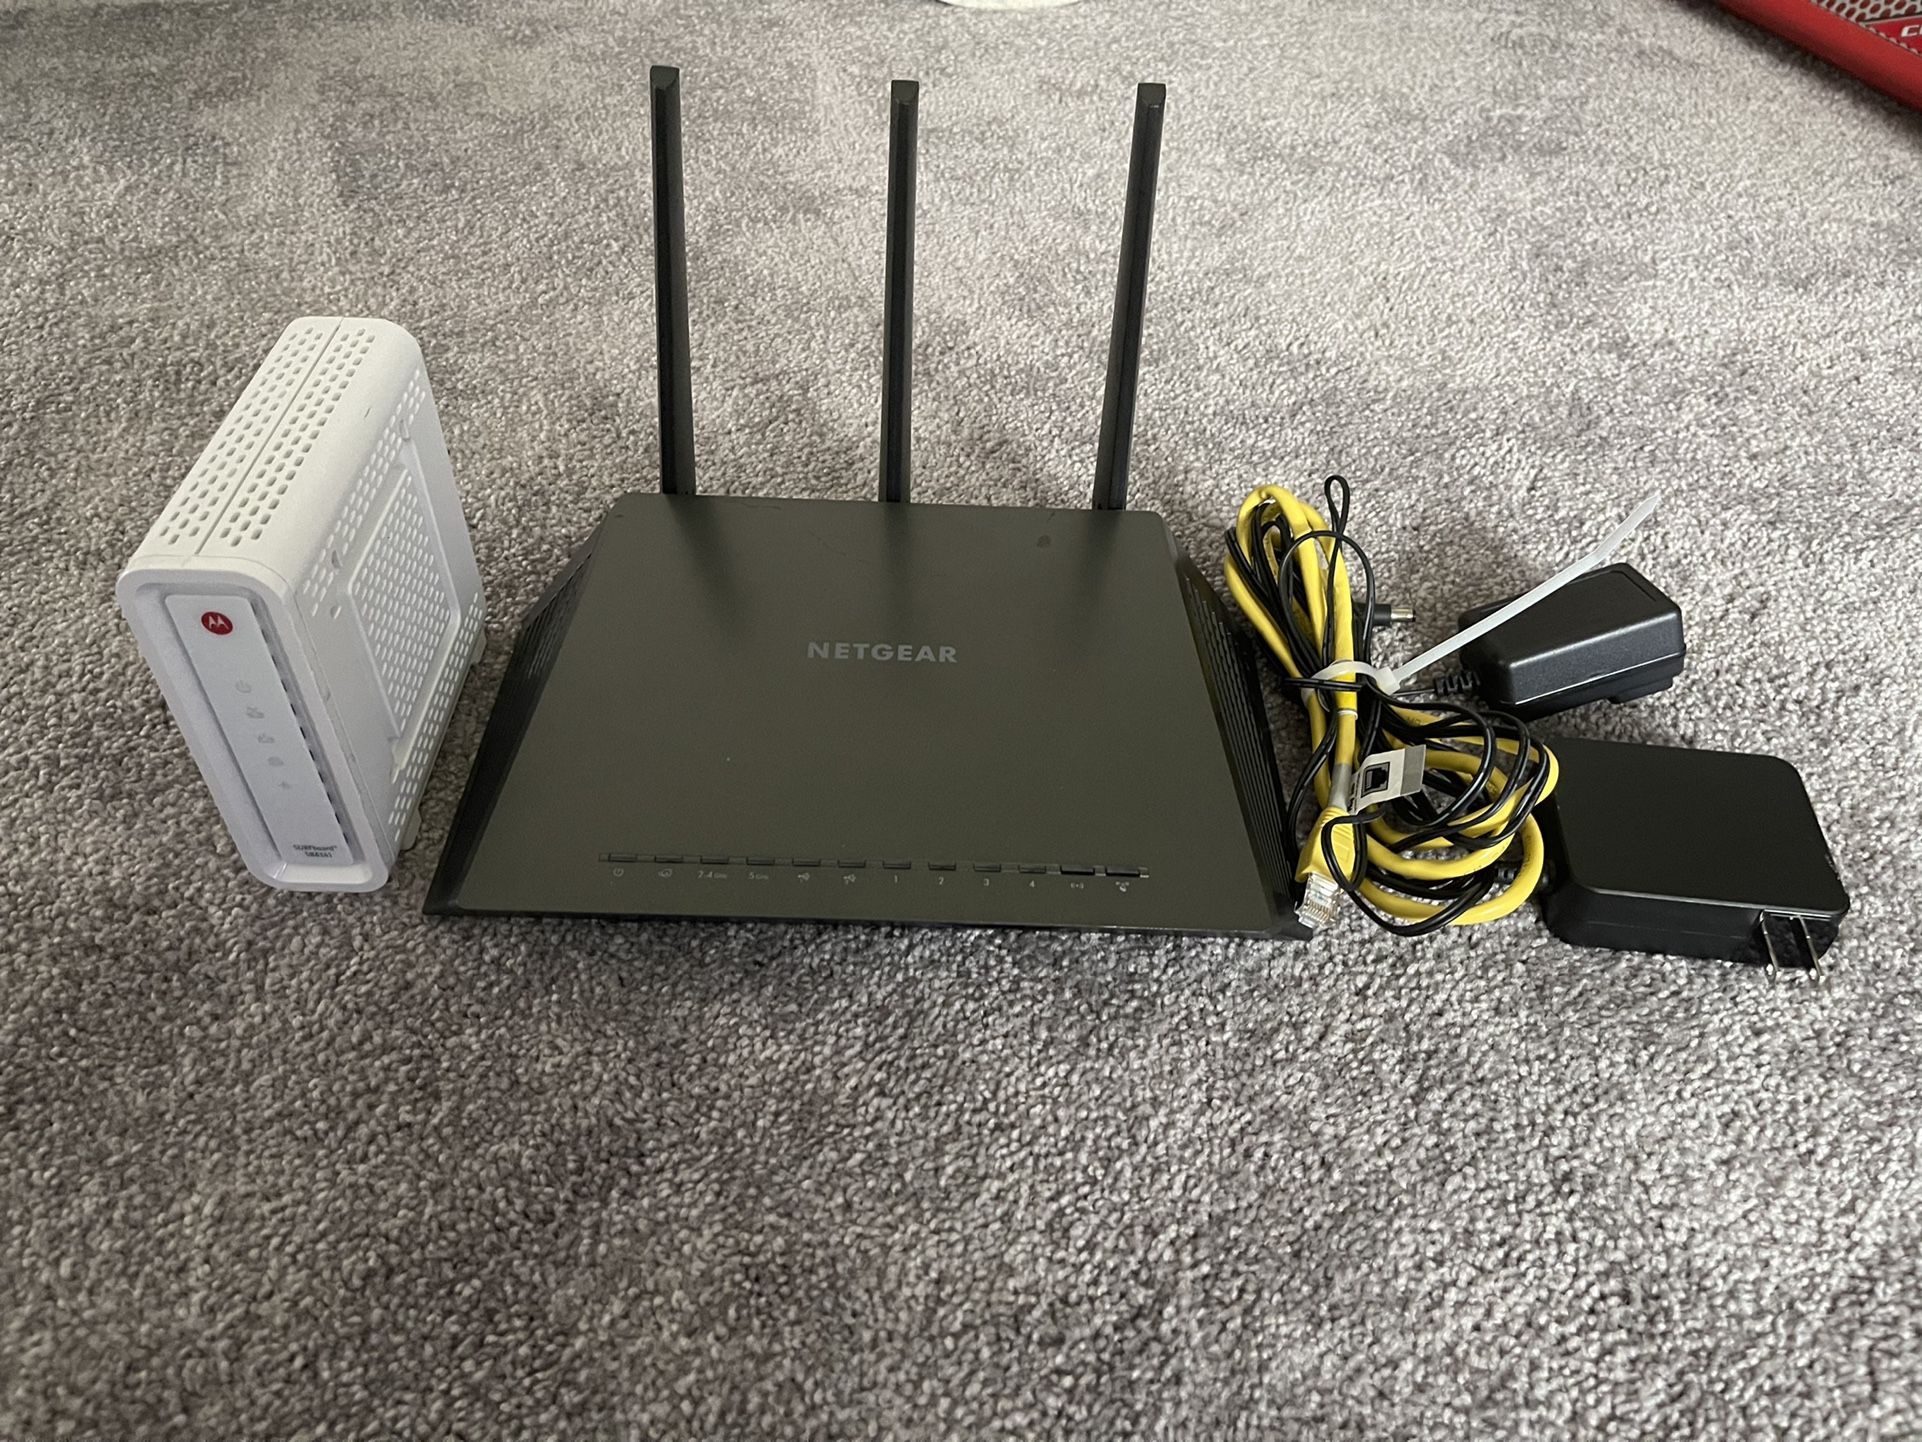 Net Gear Modem and router